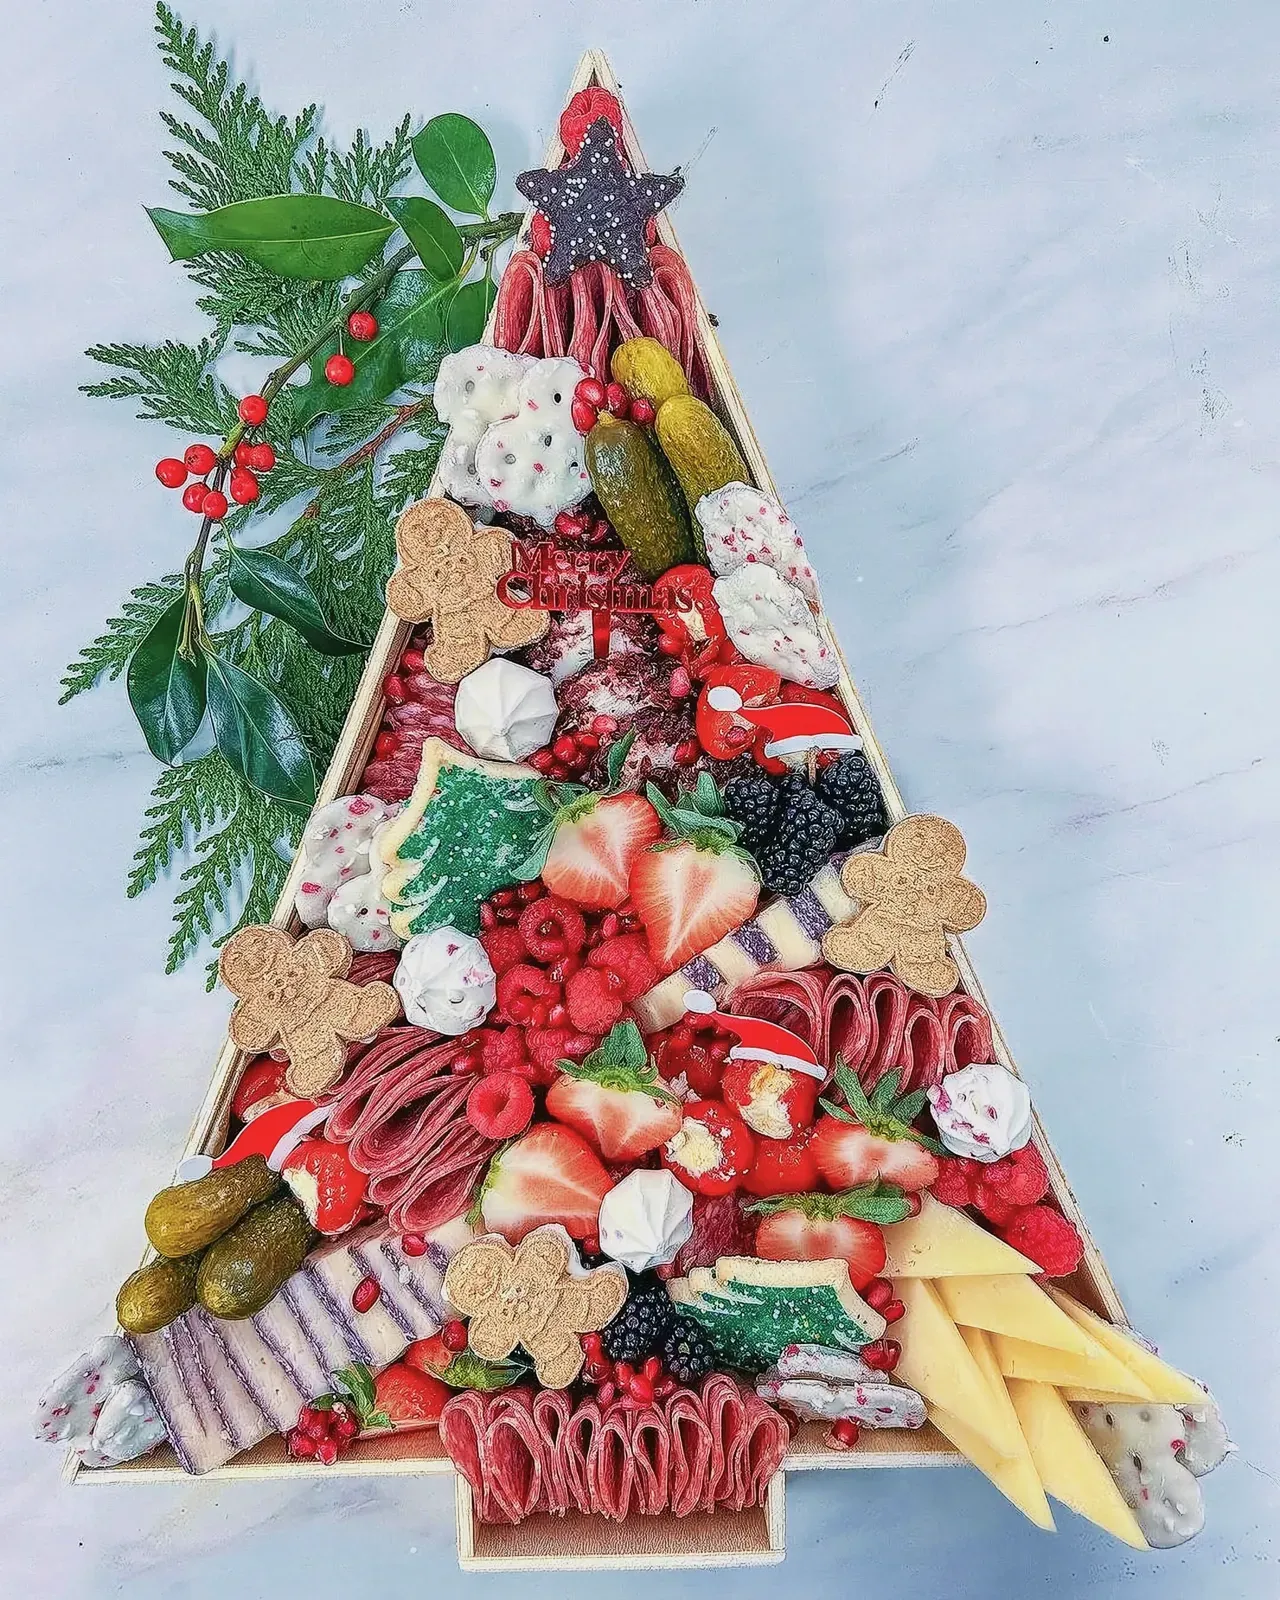 Christmas Tree charcuterie with an assortment of fruits, veggies, cheeses, and meats.